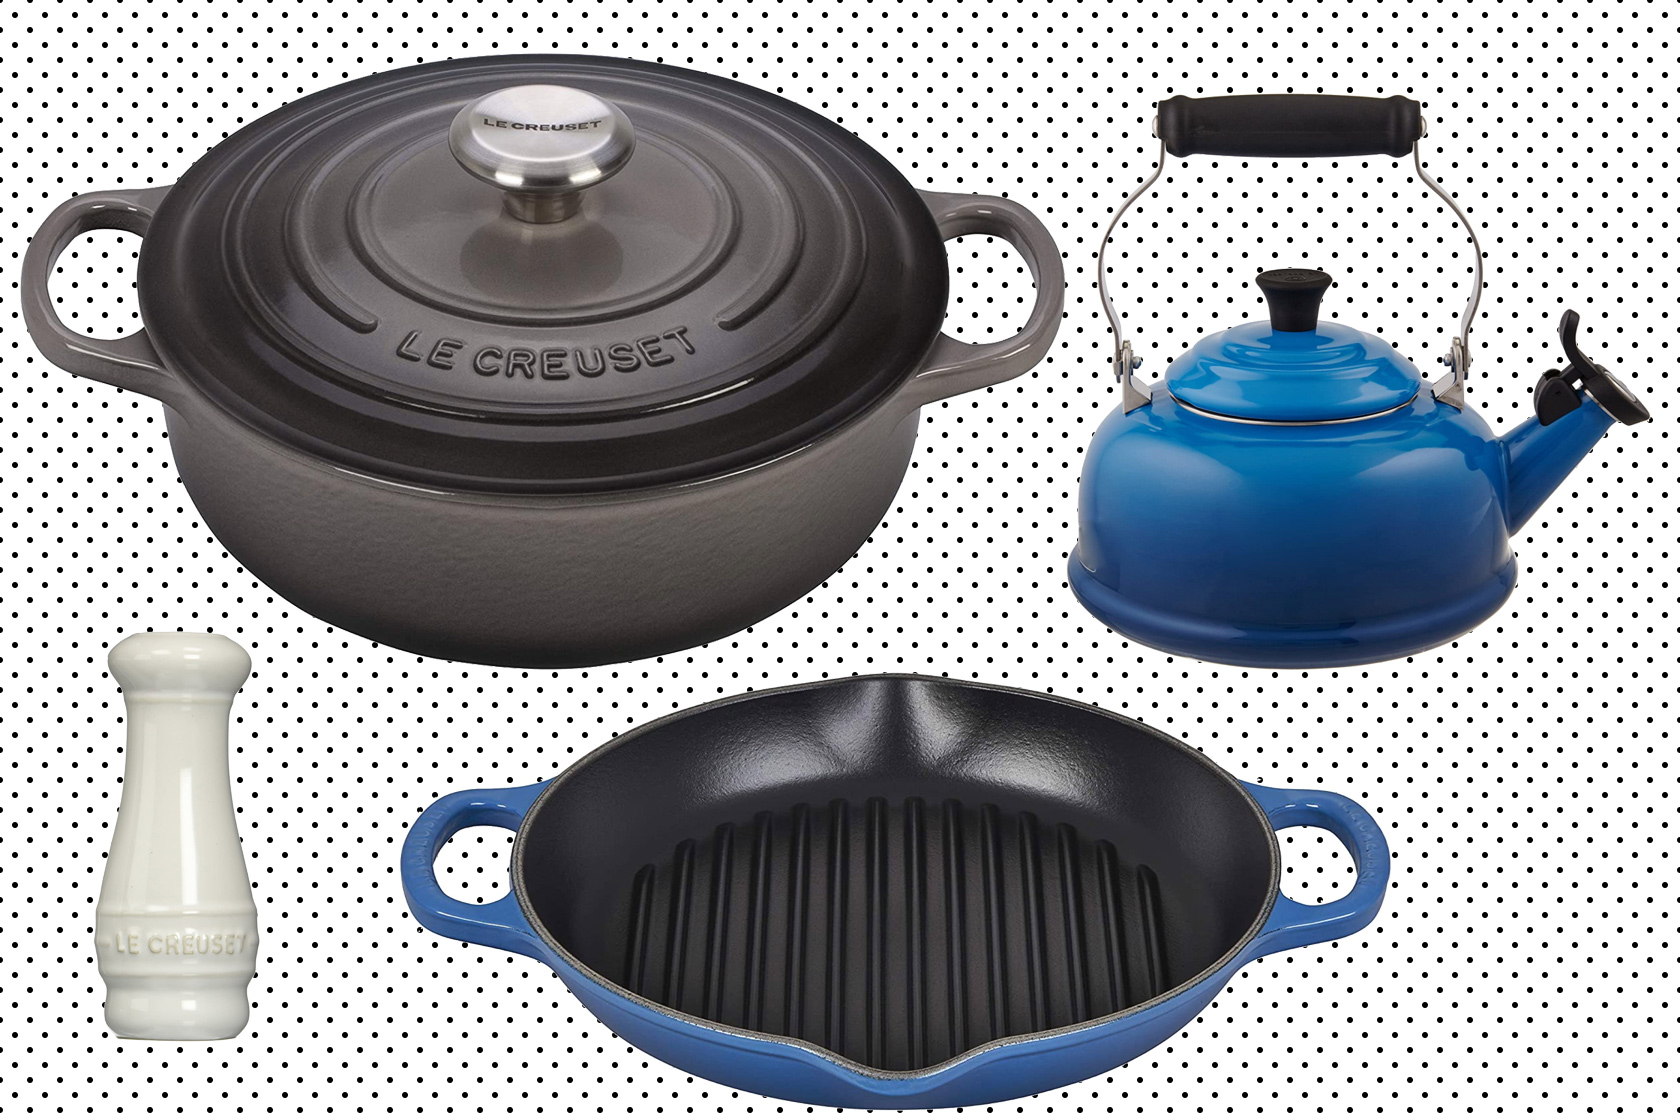 This Le Creuset sale is better than the deals were on Prime Day